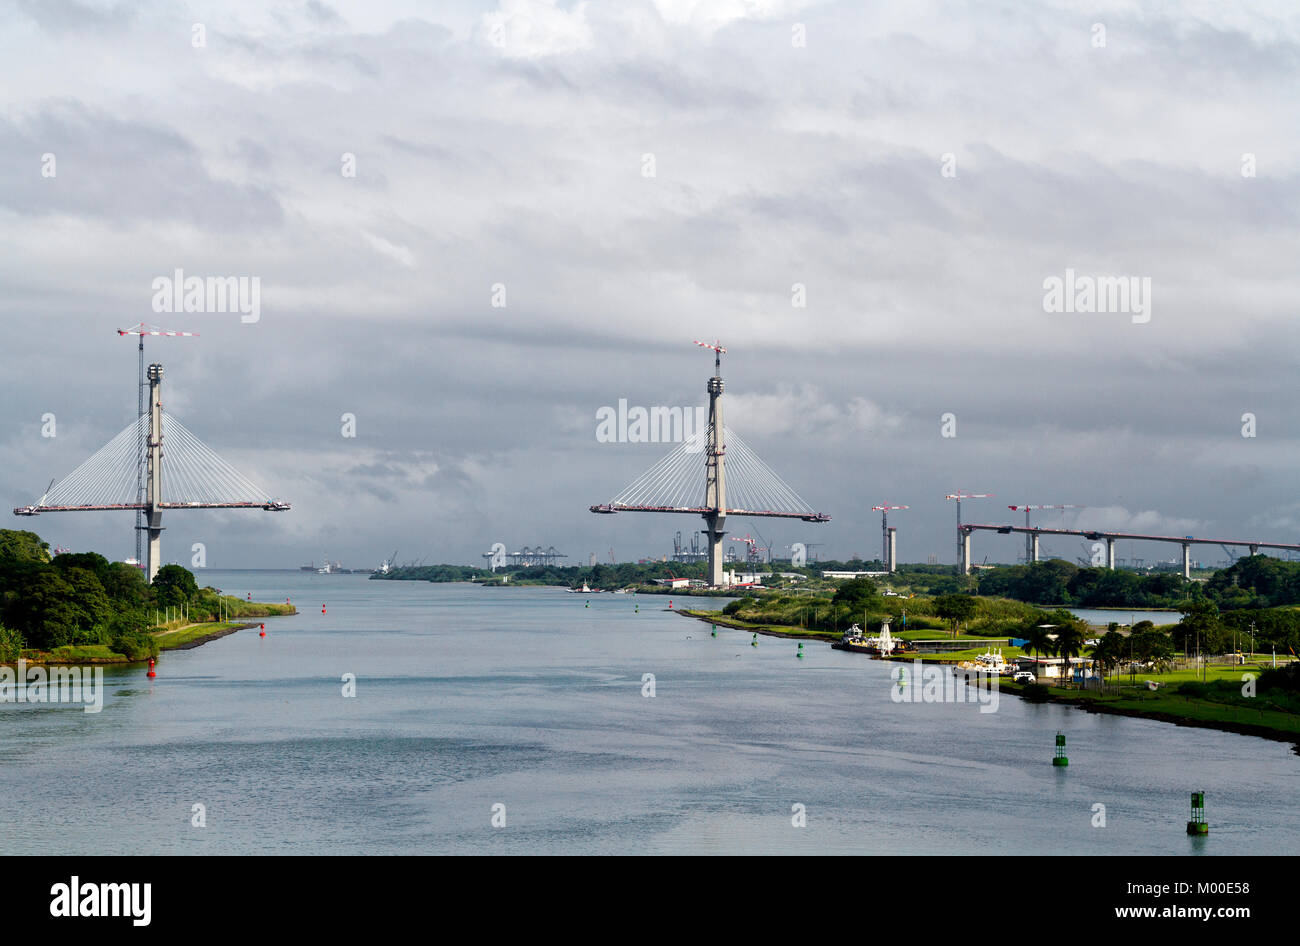 The new Atlantic Bridge being built in Colon, outside the Panama Canal. Seen from the entrance of the Canal at Gatun Locks. December 2017. Stock Photo